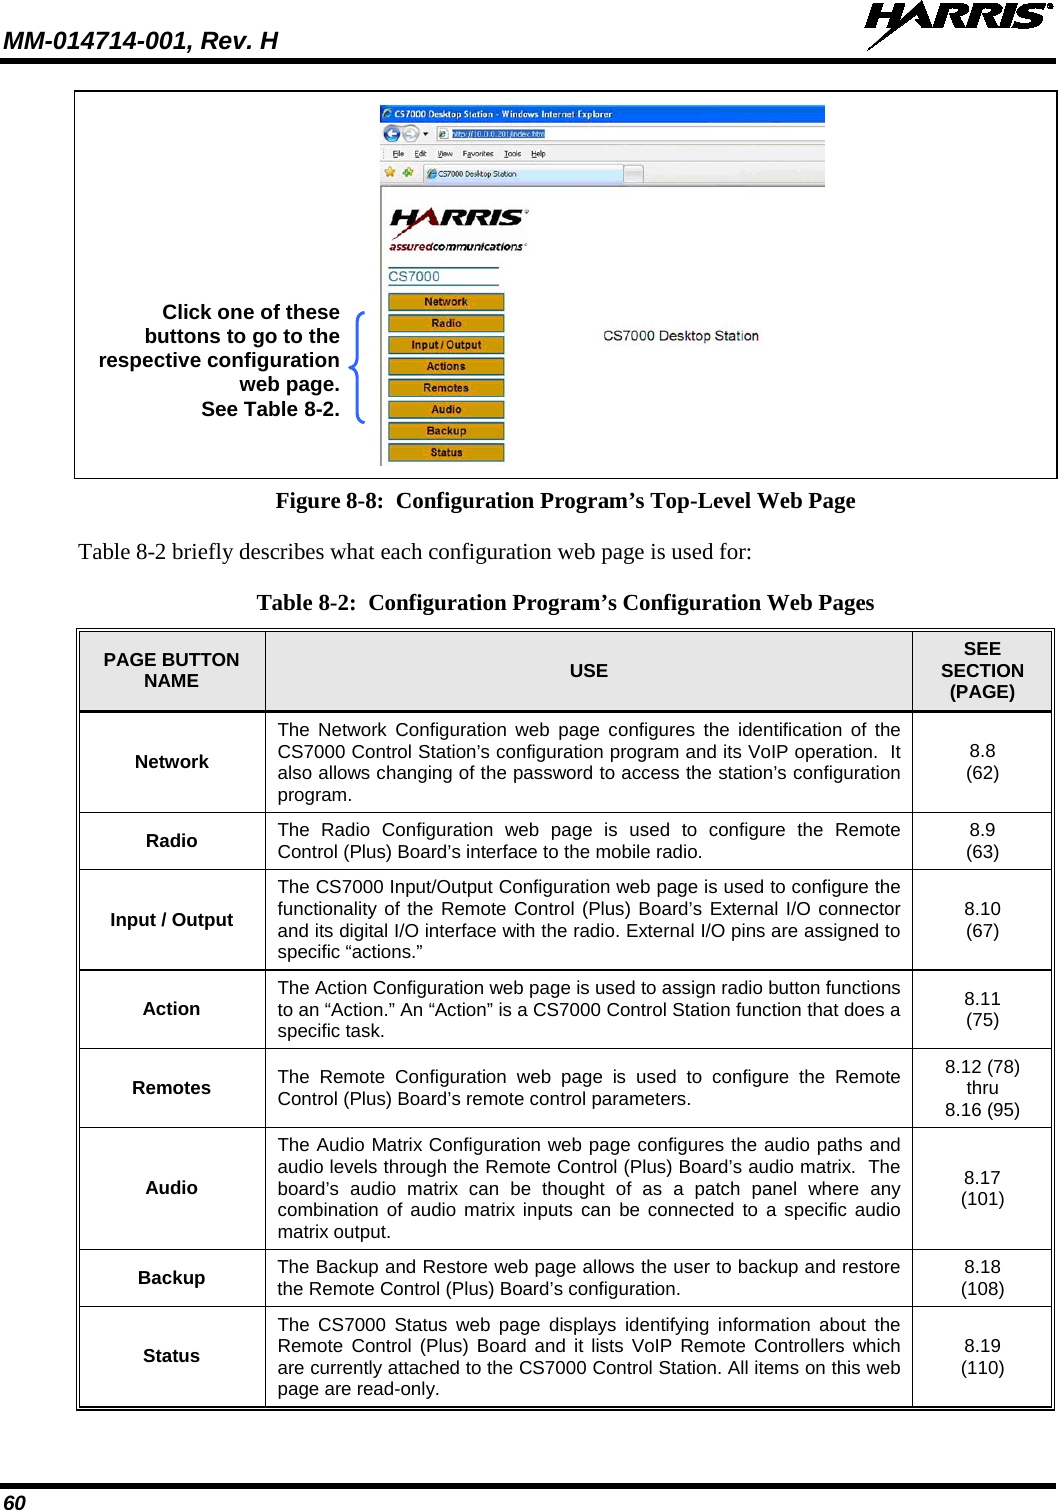 MM-014714-001, Rev. H   60                                                       Figure 8-8:  Configuration Program’s Top-Level Web Page Table 8-2 briefly describes what each configuration web page is used for:  Table 8-2:  Configuration Program’s Configuration Web Pages PAGE BUTTON NAME USE SEE SECTION (PAGE) Network The Network Configuration web page configures the identification of the CS7000 Control Station’s configuration program and its VoIP operation.  It also allows changing of the password to access the station’s configuration program. 8.8 (62) Radio The Radio Configuration web page is used to configure the Remote Control (Plus) Board’s interface to the mobile radio. 8.9 (63) Input / Output The CS7000 Input/Output Configuration web page is used to configure the functionality of the Remote Control (Plus) Board’s External I/O connector and its digital I/O interface with the radio. External I/O pins are assigned to specific “actions.” 8.10 (67) Action The Action Configuration web page is used to assign radio button functions to an “Action.” An “Action” is a CS7000 Control Station function that does a specific task. 8.11 (75) Remotes The Remote Configuration web page is used to configure the Remote Control (Plus) Board’s remote control parameters. 8.12 (78) thru 8.16 (95) Audio The Audio Matrix Configuration web page configures the audio paths and audio levels through the Remote Control (Plus) Board’s audio matrix.  The board’s audio matrix can be thought of as a patch panel where any combination of audio matrix inputs can be connected to a specific audio matrix output. 8.17 (101) Backup The Backup and Restore web page allows the user to backup and restore the Remote Control (Plus) Board’s configuration. 8.18 (108) Status The CS7000 Status web page displays identifying information about the Remote Control (Plus) Board and it lists VoIP Remote Controllers which are currently attached to the CS7000 Control Station. All items on this web page are read-only. 8.19 (110) Click one of these buttons to go to the respective configuration web page. See Table 8-2. 